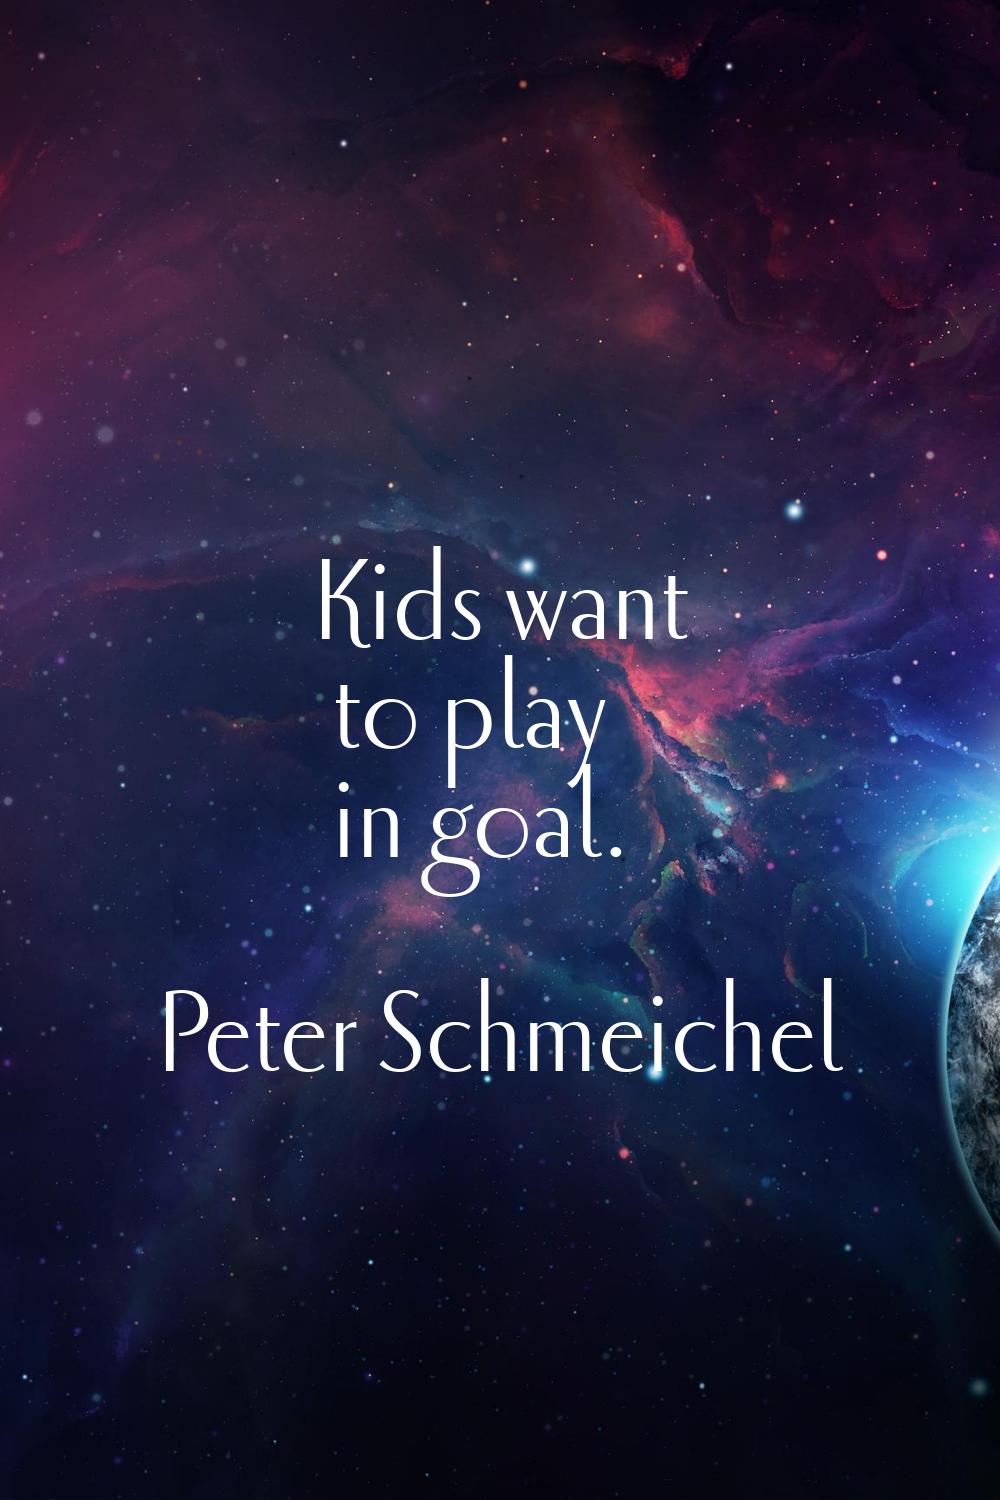 Kids want to play in goal.